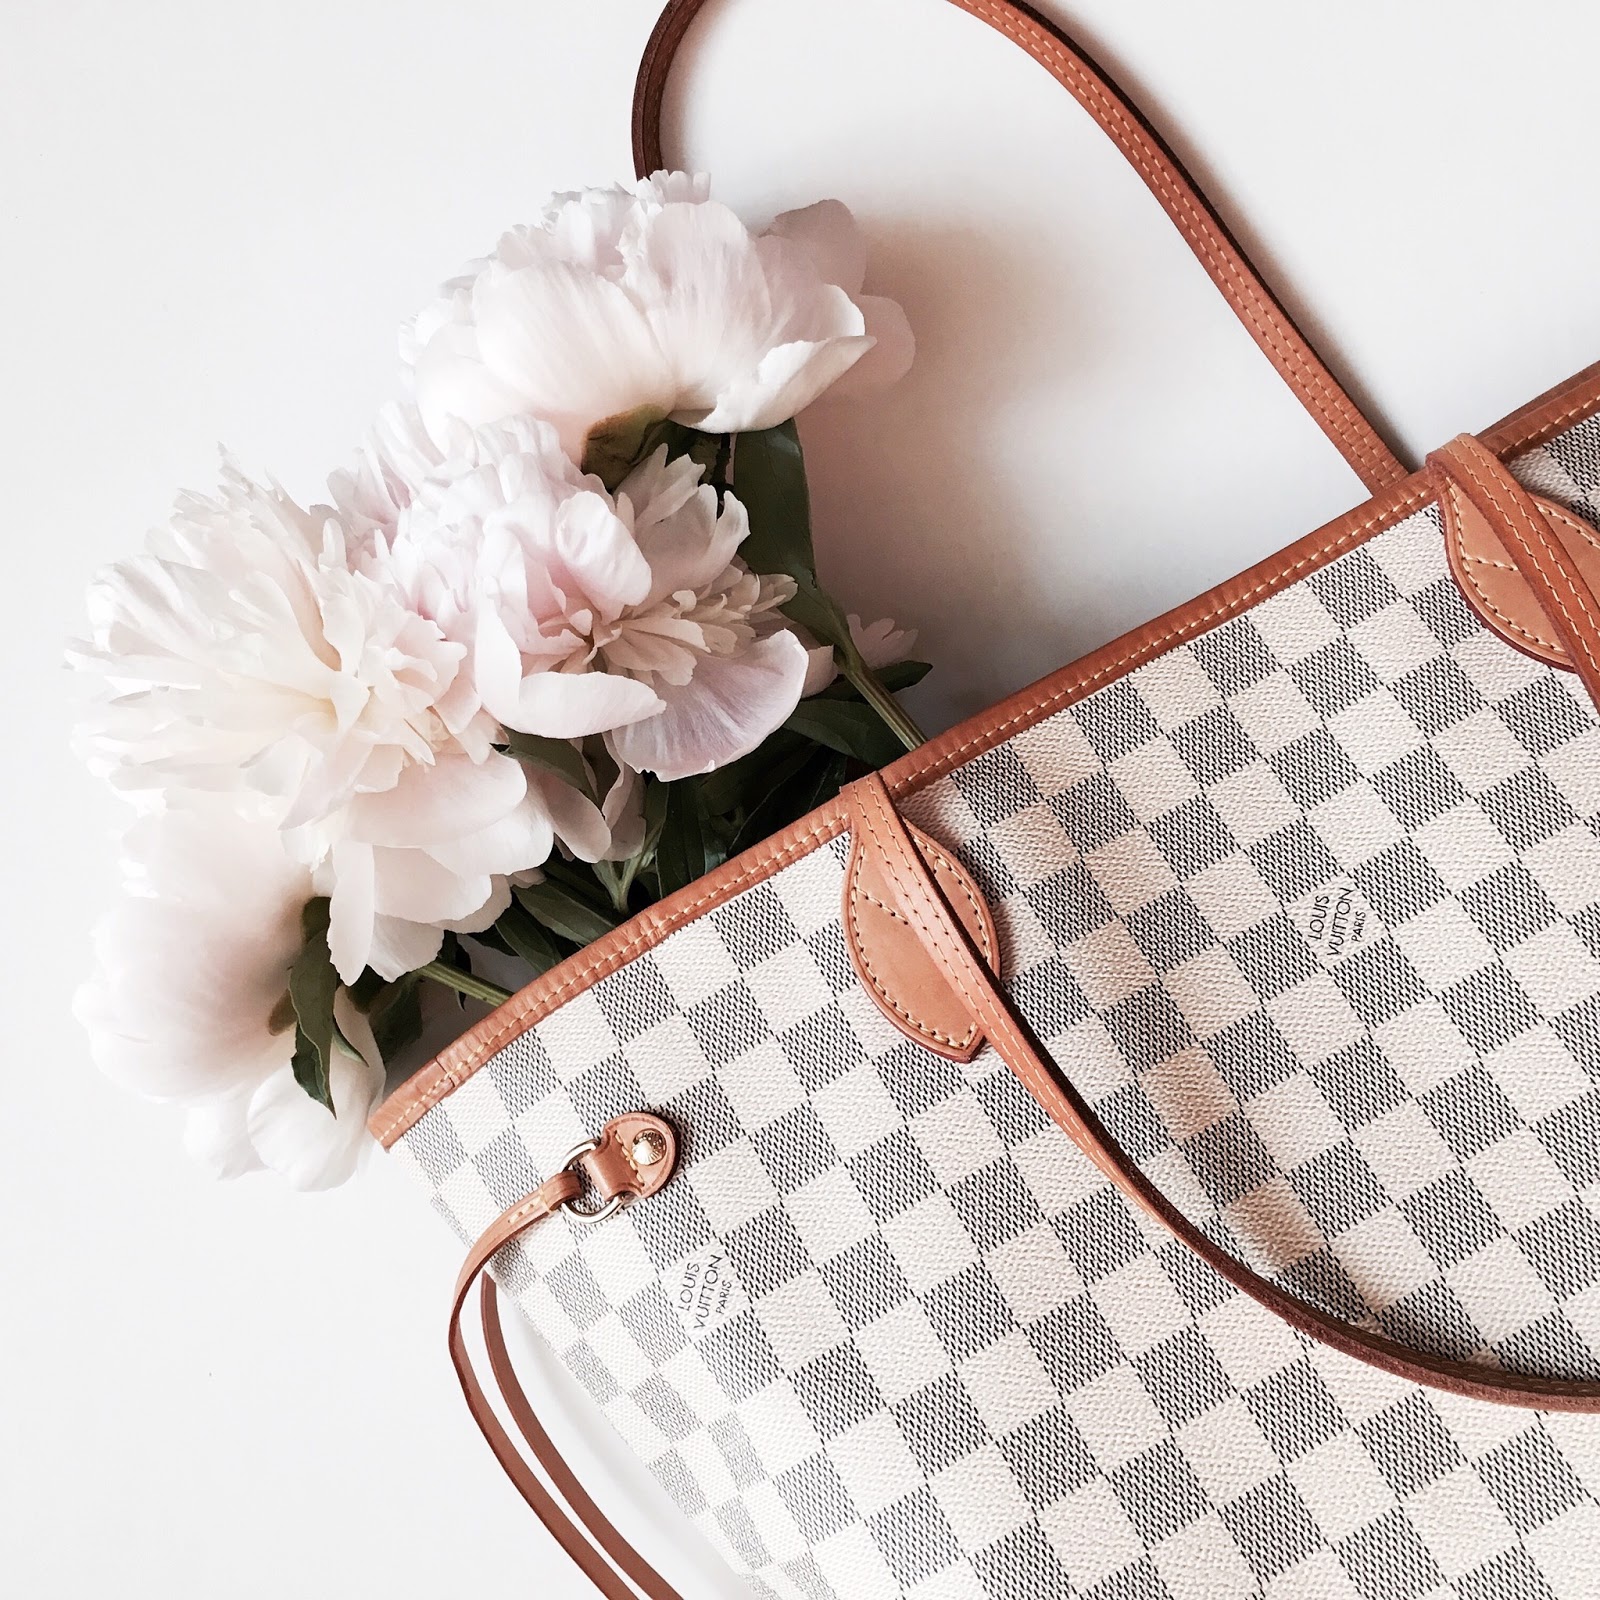 Pale pink peonies and Louis Vuitton. Need I say more? :)